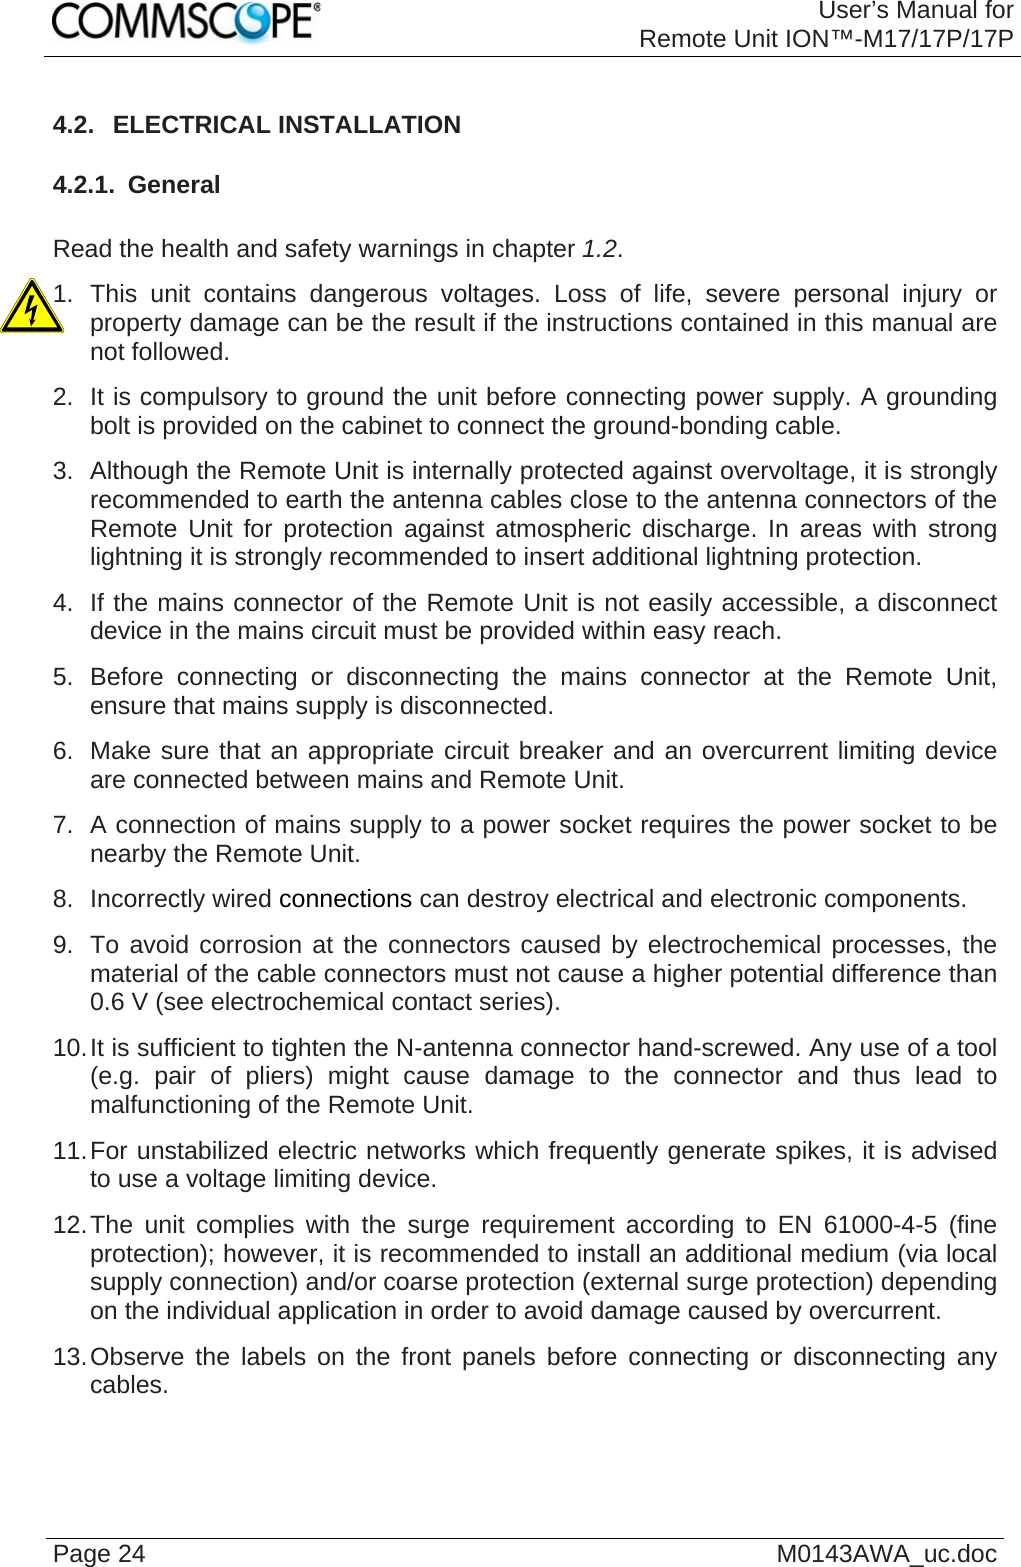 User’s Manual forRemote Unit ION™-M17/17P/17P Page 24  M0143AWA_uc.doc4.2.  ELECTRICAL INSTALLATION 4.2.1.  General  Read the health and safety warnings in chapter 1.2. 1. This unit contains dangerous voltages. Loss of life, severe personal injury or property damage can be the result if the instructions contained in this manual are not followed. 2.  It is compulsory to ground the unit before connecting power supply. A grounding bolt is provided on the cabinet to connect the ground-bonding cable. 3.  Although the Remote Unit is internally protected against overvoltage, it is strongly recommended to earth the antenna cables close to the antenna connectors of the Remote Unit for protection against atmospheric discharge. In areas with strong lightning it is strongly recommended to insert additional lightning protection. 4.  If the mains connector of the Remote Unit is not easily accessible, a disconnect device in the mains circuit must be provided within easy reach. 5. Before connecting or disconnecting the mains connector at the Remote Unit, ensure that mains supply is disconnected. 6.  Make sure that an appropriate circuit breaker and an overcurrent limiting device are connected between mains and Remote Unit. 7.  A connection of mains supply to a power socket requires the power socket to be nearby the Remote Unit. 8. Incorrectly wired connections can destroy electrical and electronic components. 9.  To avoid corrosion at the connectors caused by electrochemical processes, the material of the cable connectors must not cause a higher potential difference than 0.6 V (see electrochemical contact series). 10. It is sufficient to tighten the N-antenna connector hand-screwed. Any use of a tool (e.g. pair of pliers) might cause damage to the connector and thus lead to malfunctioning of the Remote Unit. 11. For unstabilized electric networks which frequently generate spikes, it is advised to use a voltage limiting device.  12. The unit complies with the surge requirement according to EN 61000-4-5 (fine protection); however, it is recommended to install an additional medium (via local supply connection) and/or coarse protection (external surge protection) depending on the individual application in order to avoid damage caused by overcurrent. 13. Observe the labels on the front panels before connecting or disconnecting any cables.   